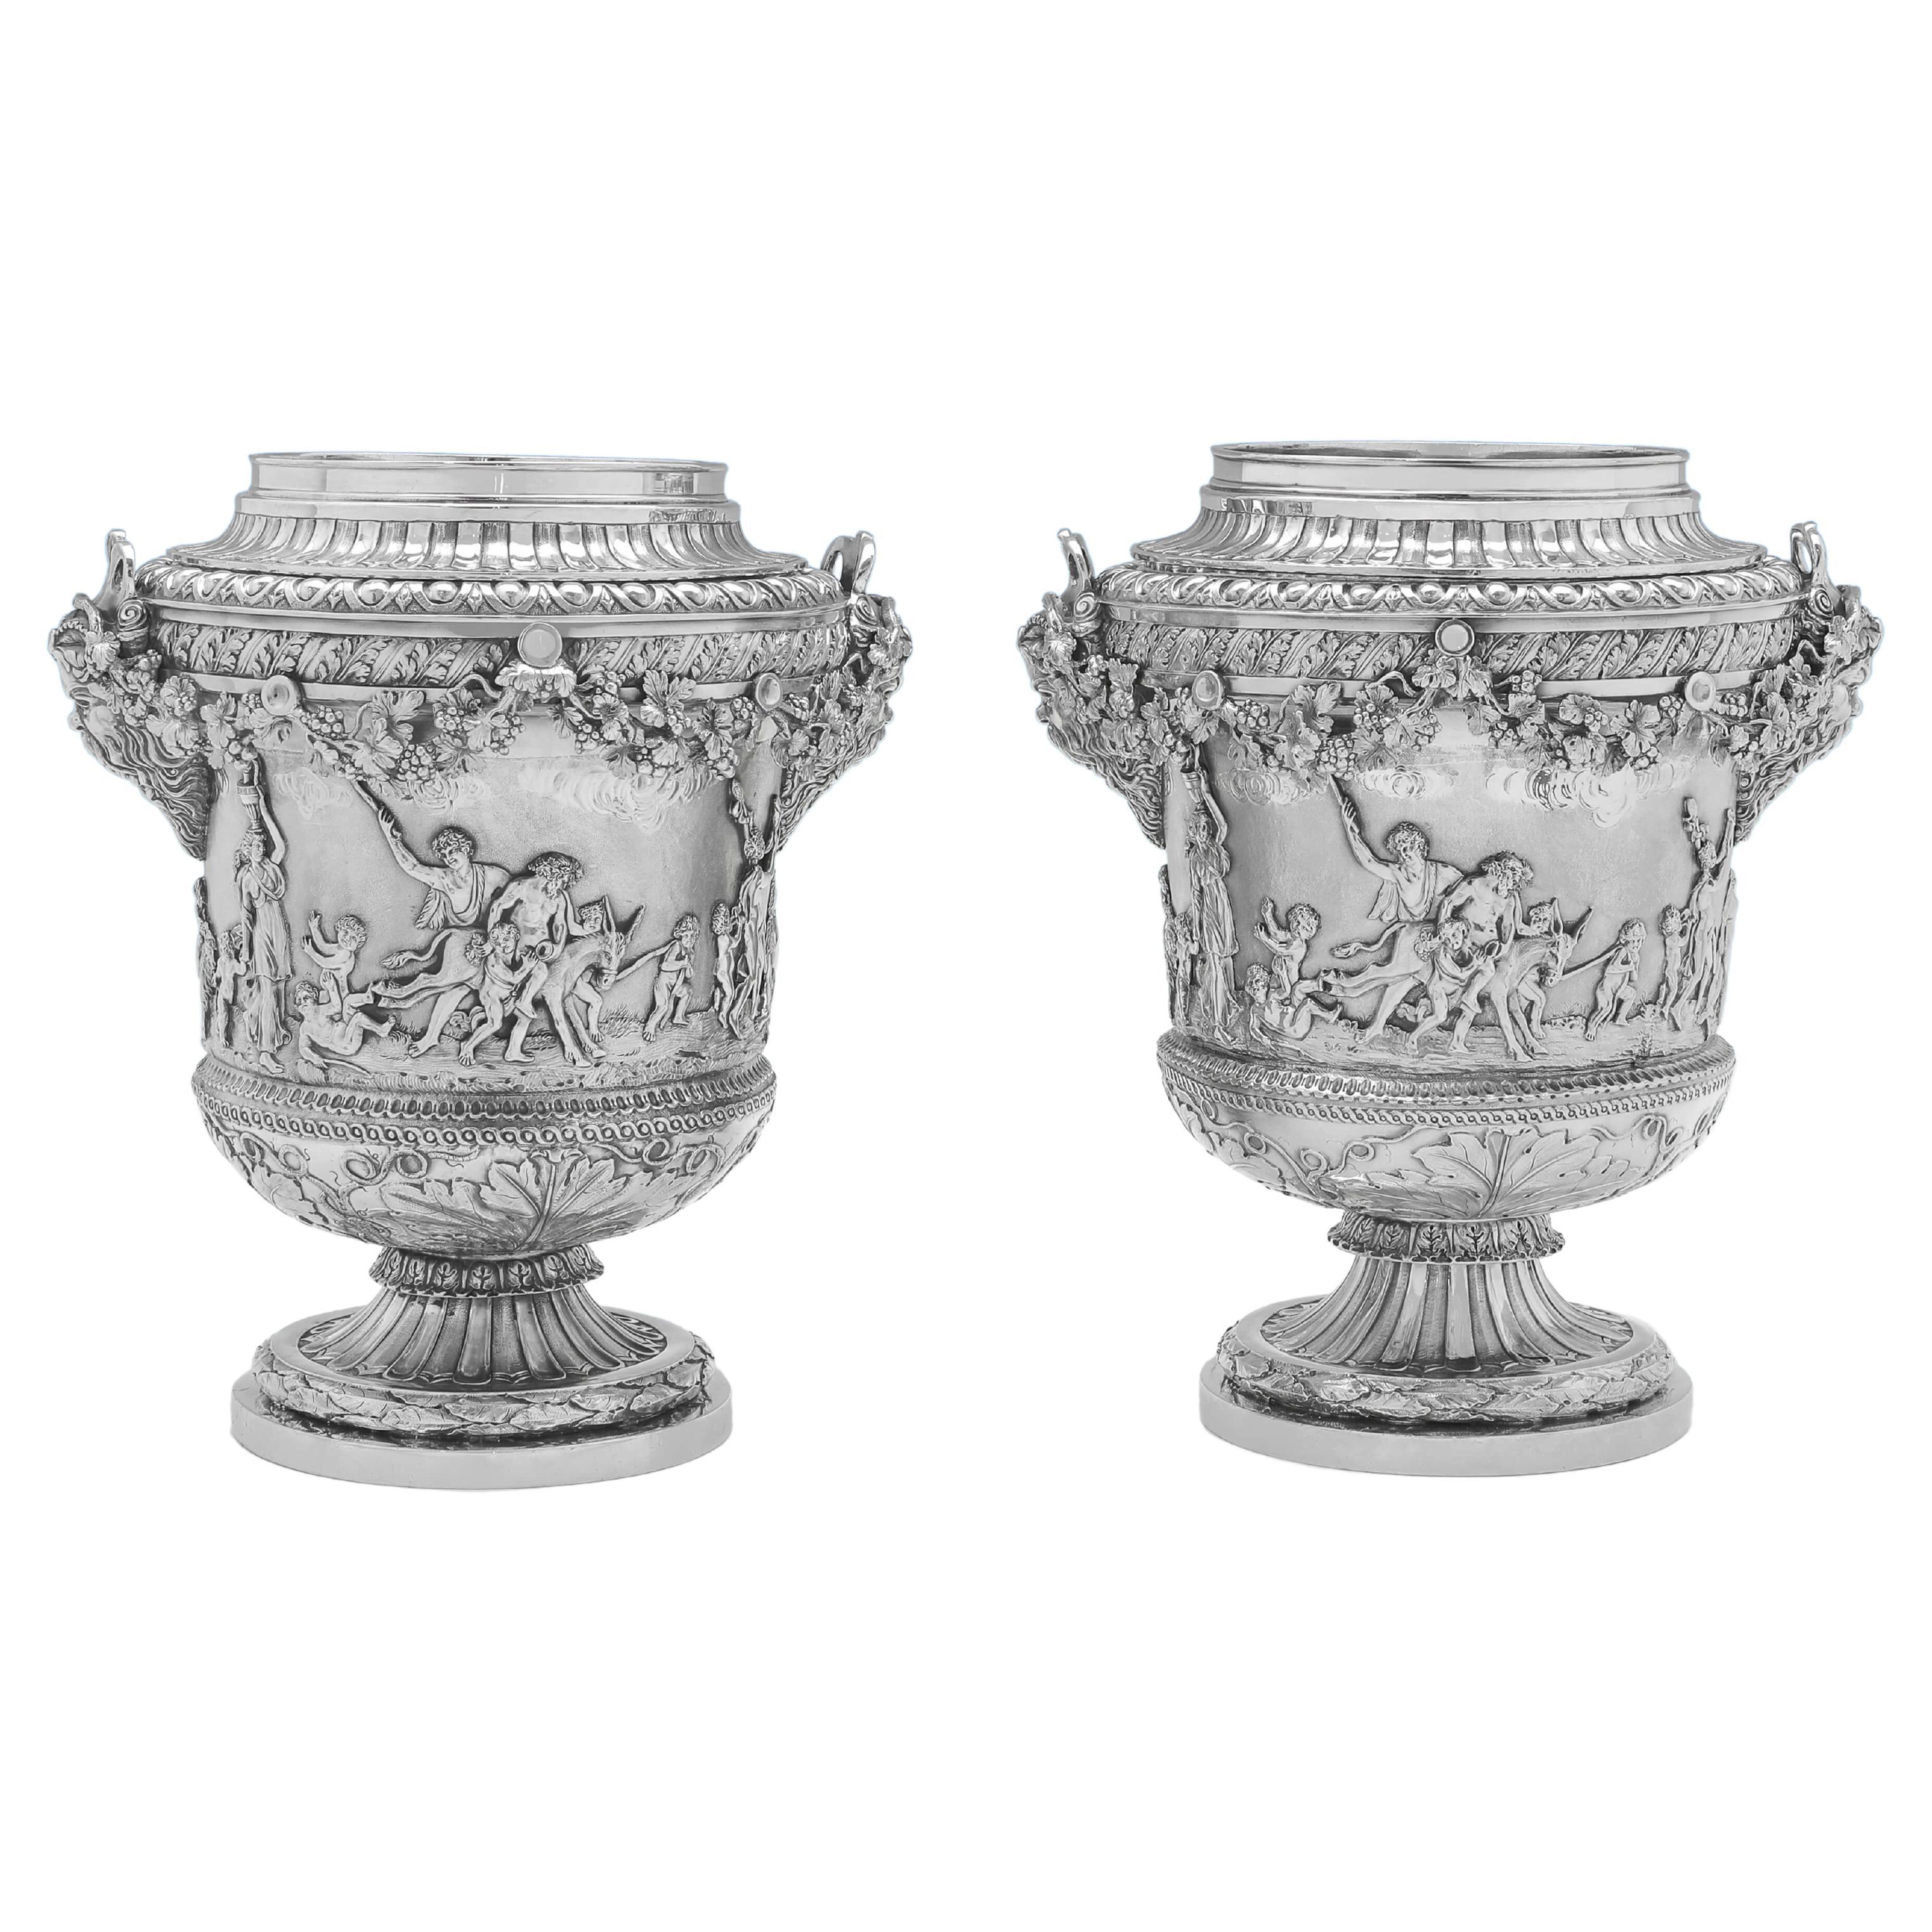 Incredible Pair of George III Period Sterling Silver Wine Coolers, London, 1804 For Sale